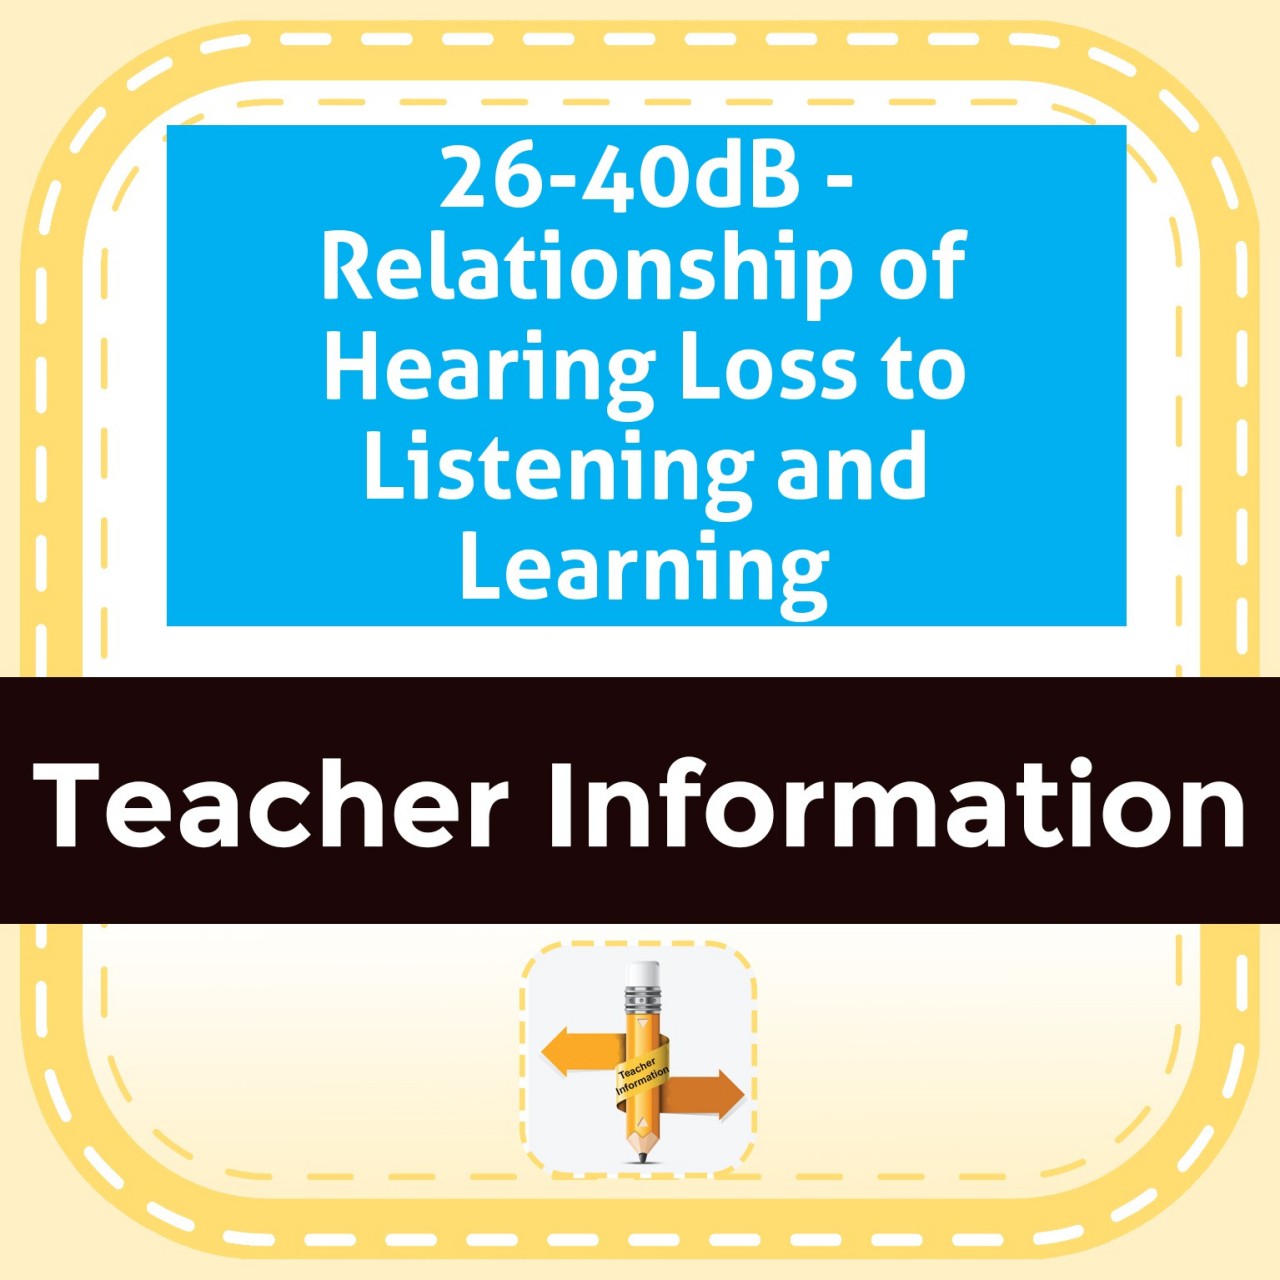 26-40dB - Relationship of Hearing Loss to Listening and Learning